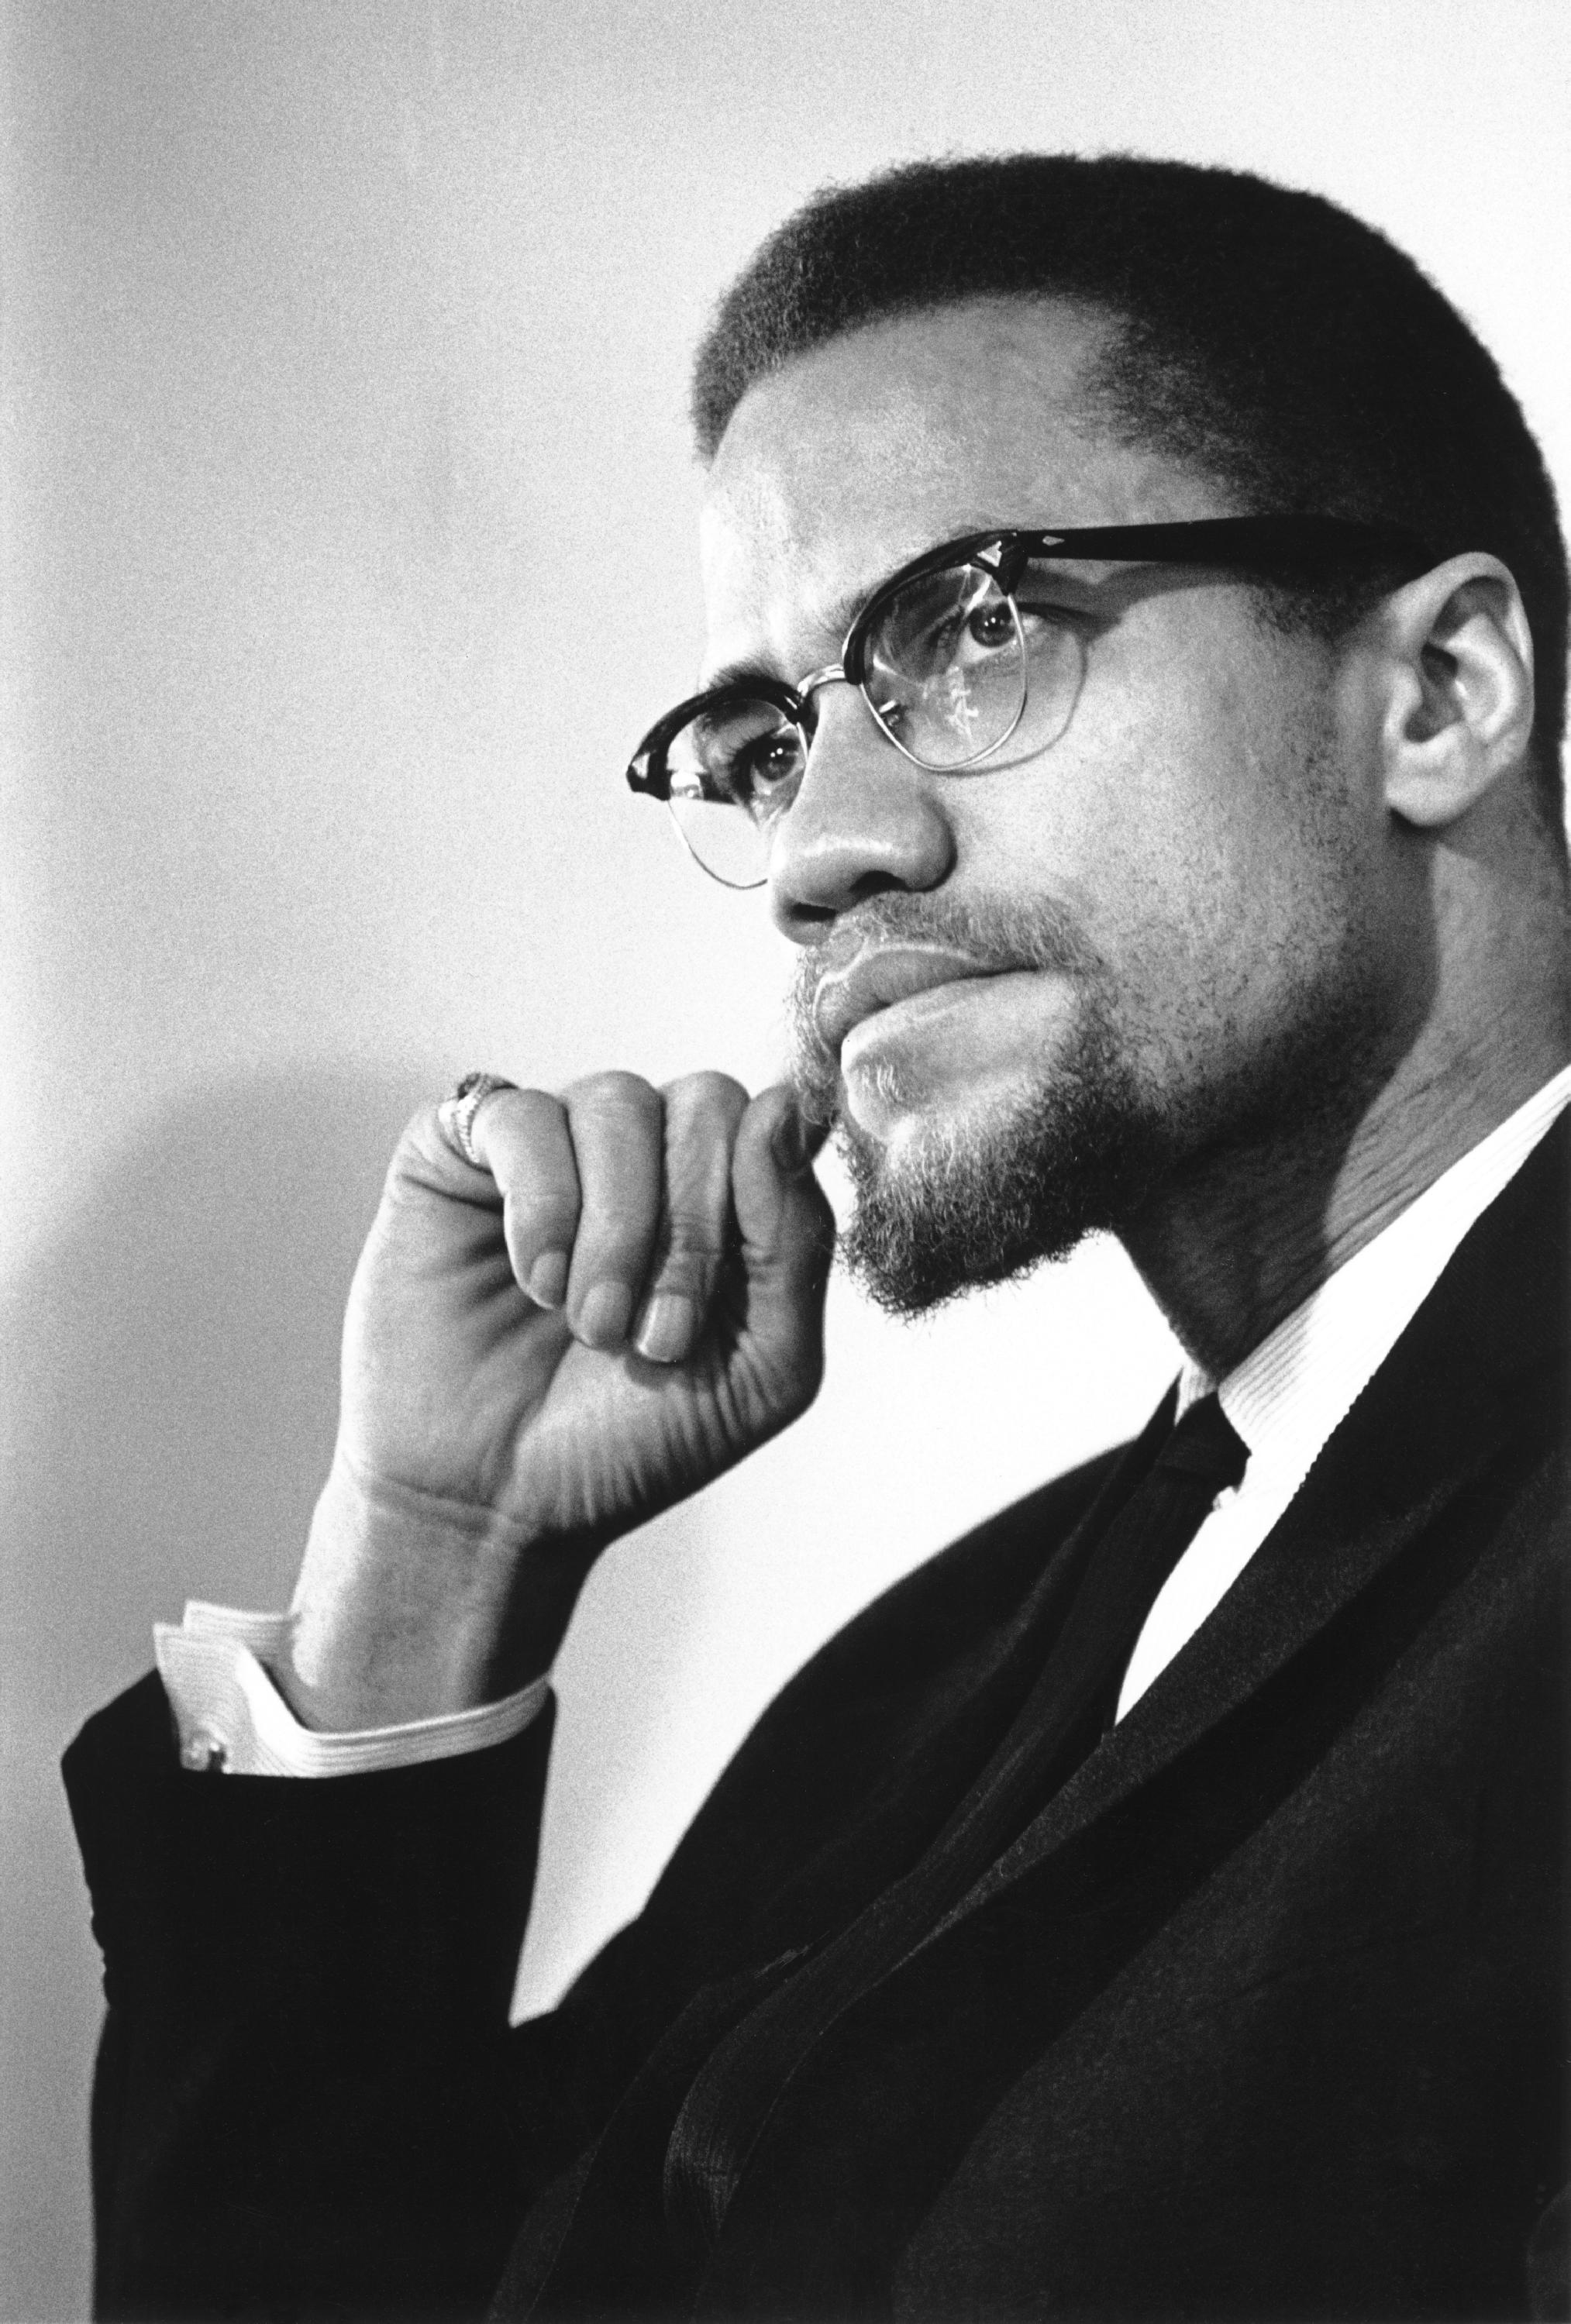 Malcolm X Quotes On Love 81 images in Collection Page 1